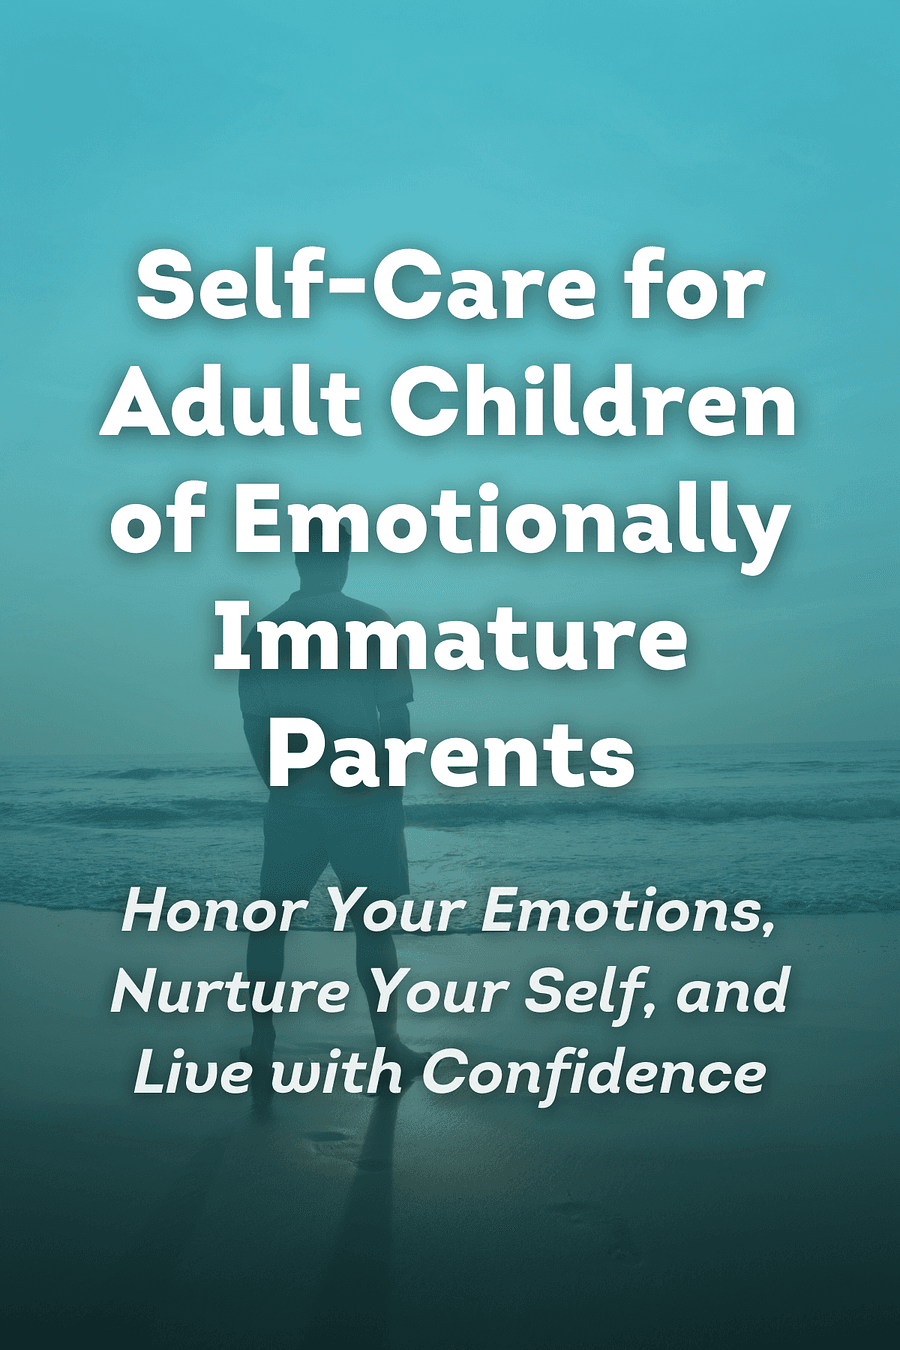 Self-Care for Adult Children of Emotionally Immature Parents by Lindsay C. Gibson - Book Summary